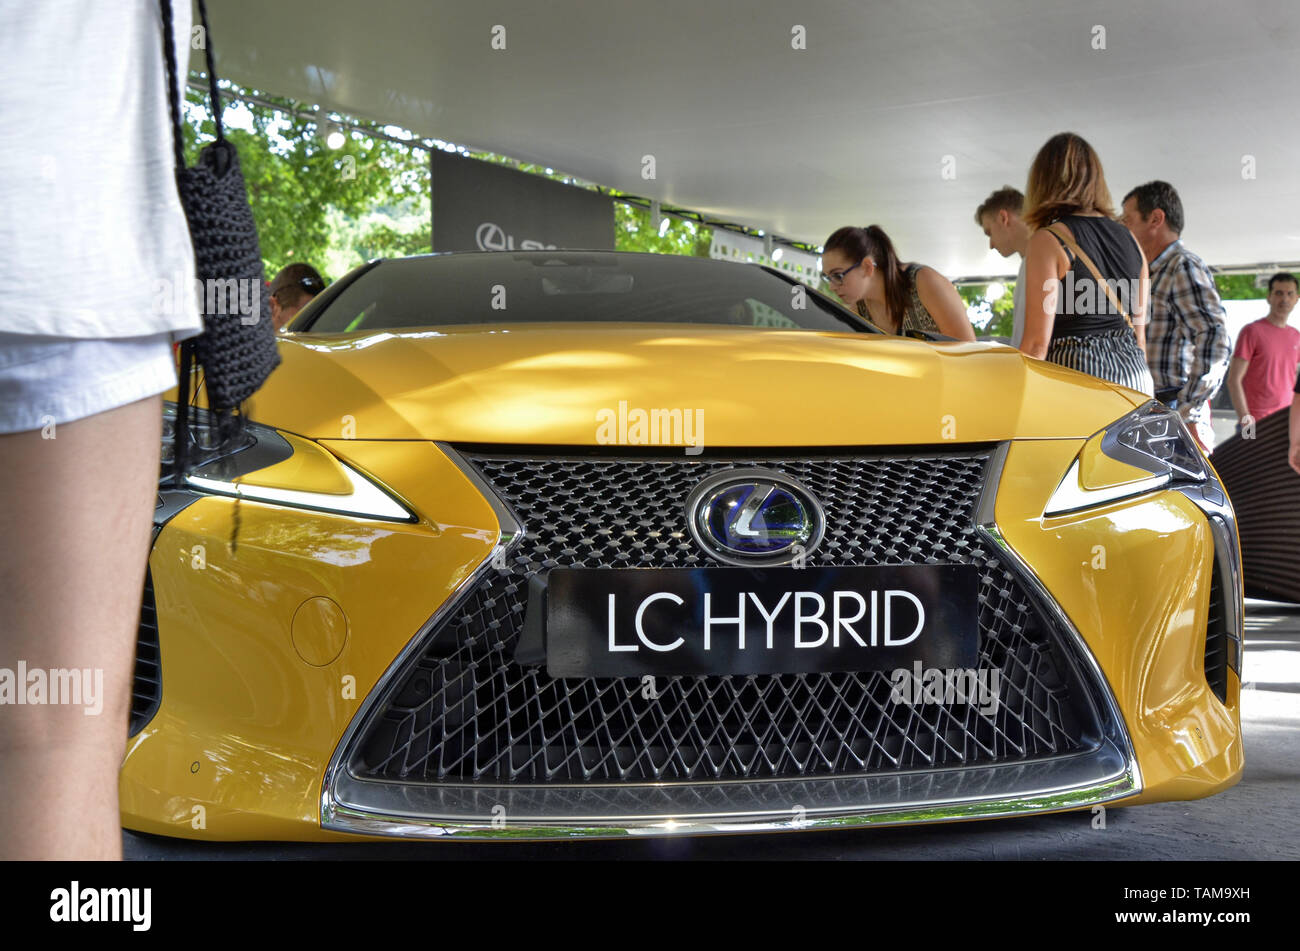 Turin, Piedmont, Italy. June 2018. At the Valentino park, the motor show. At the Lexus stand, the yellow-colored lc attracts the attention of the peop Stock Photo